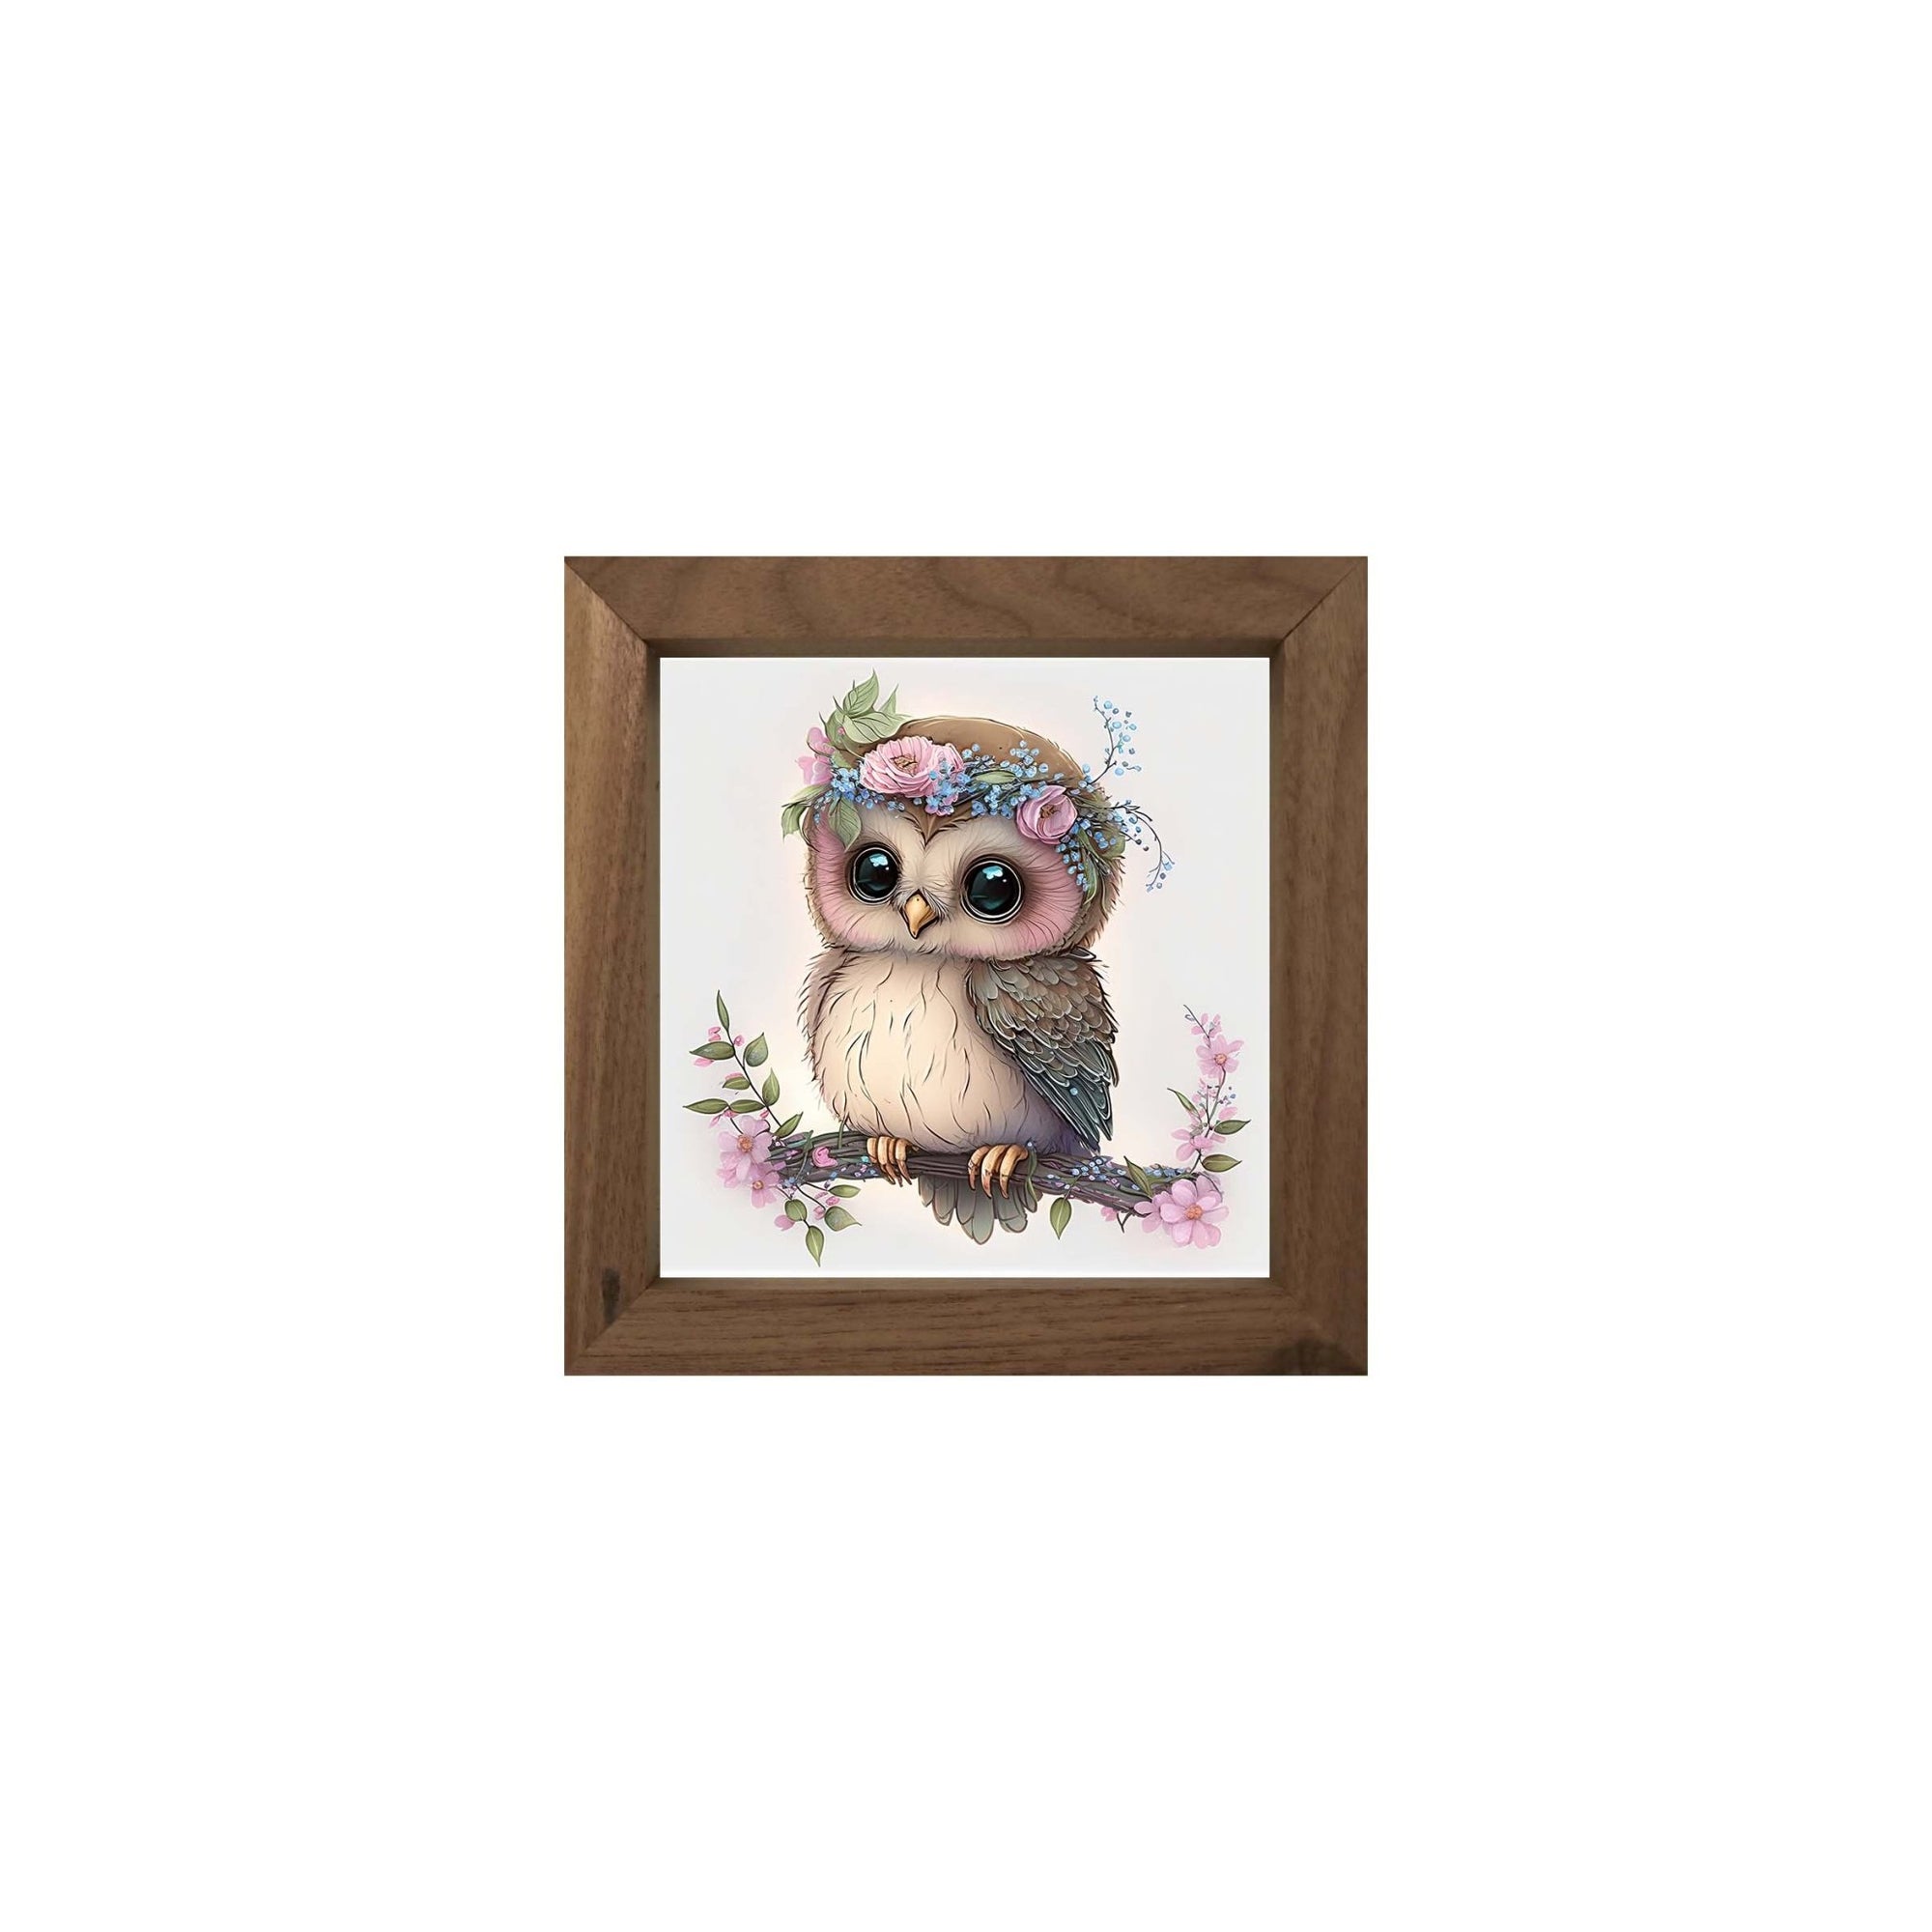 Owl Collection: 7x7 Wooden Wall Art Sign Framed Shadow Box| Baby Owl2 - LifeSong Milestones